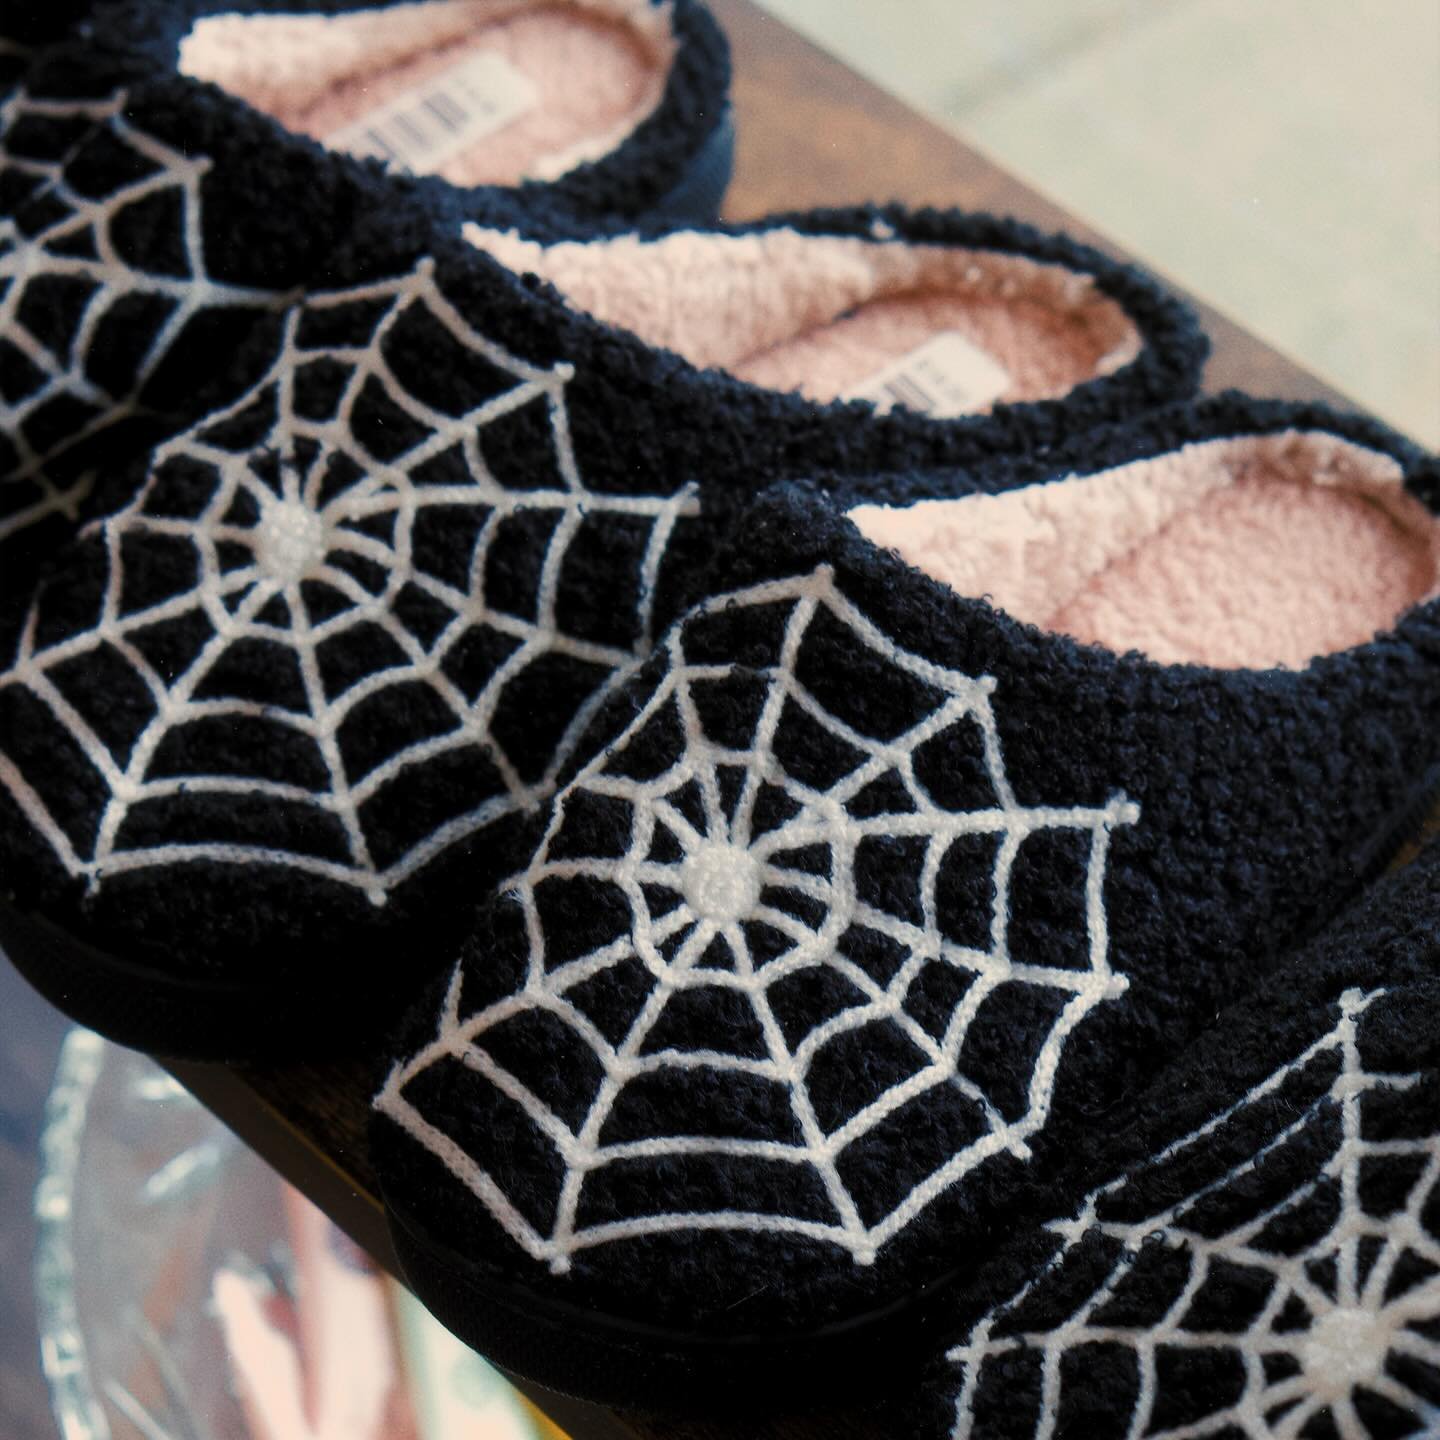 If you&rsquo;re like us and the ✨🖤ghoul🖤 ✨ in you wasn&rsquo;t just a phase just know we have the accessories 💅 you need to keep your spookiness up all year round&hellip;..that includes comfy slippers. 

🖤

🖤

🖤

#alternativestyle #spookycute #